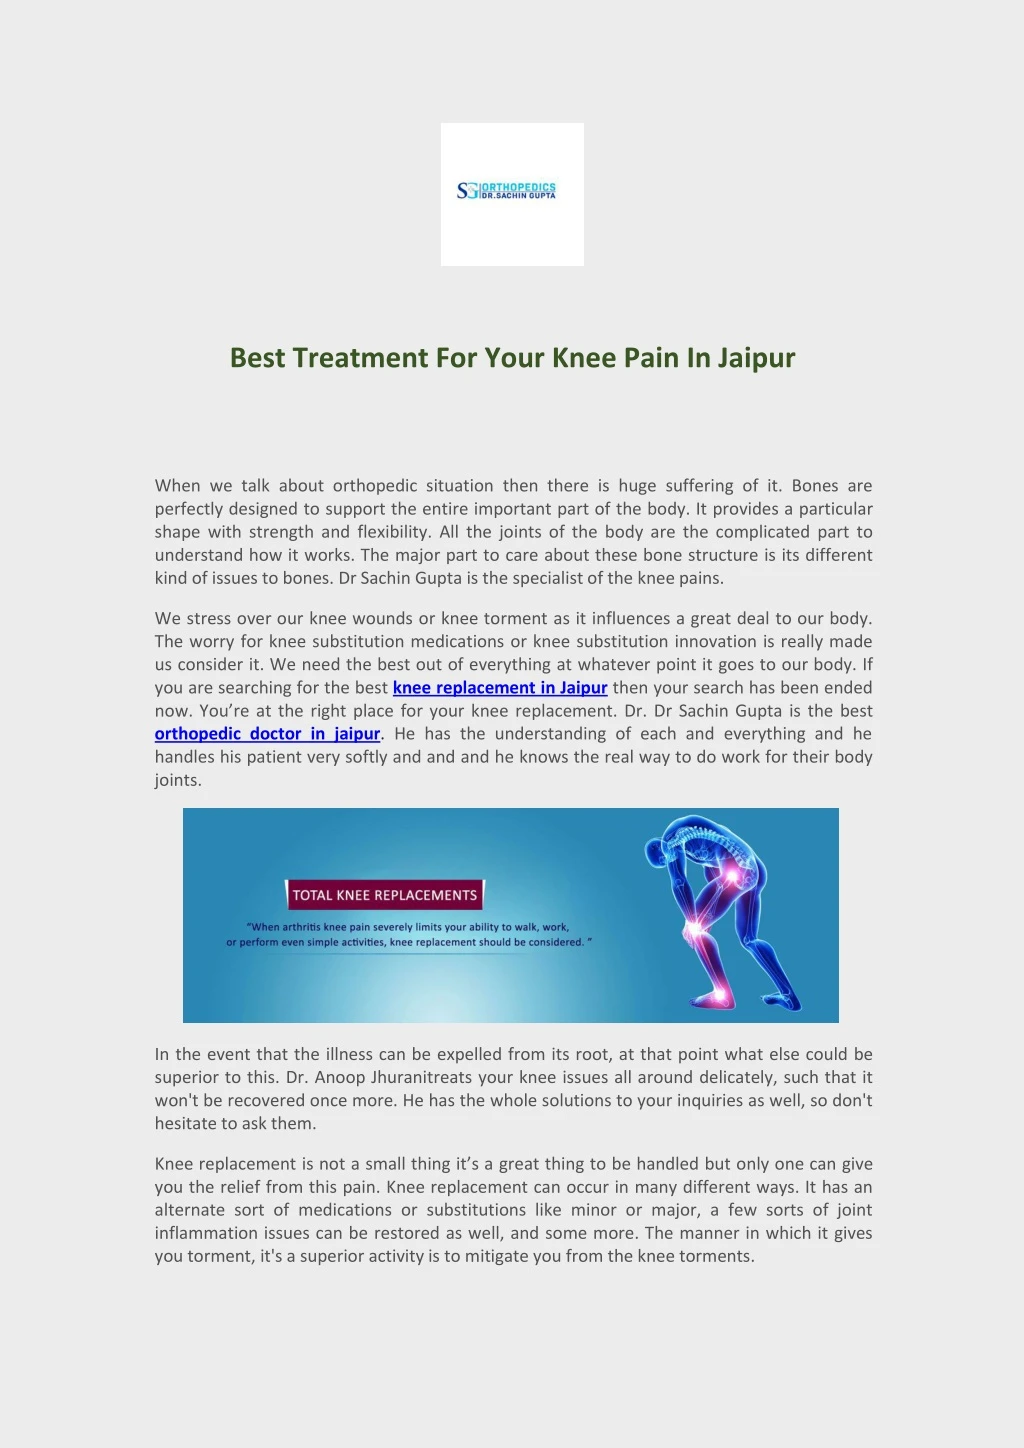 best treatment for your knee pain in jaipur